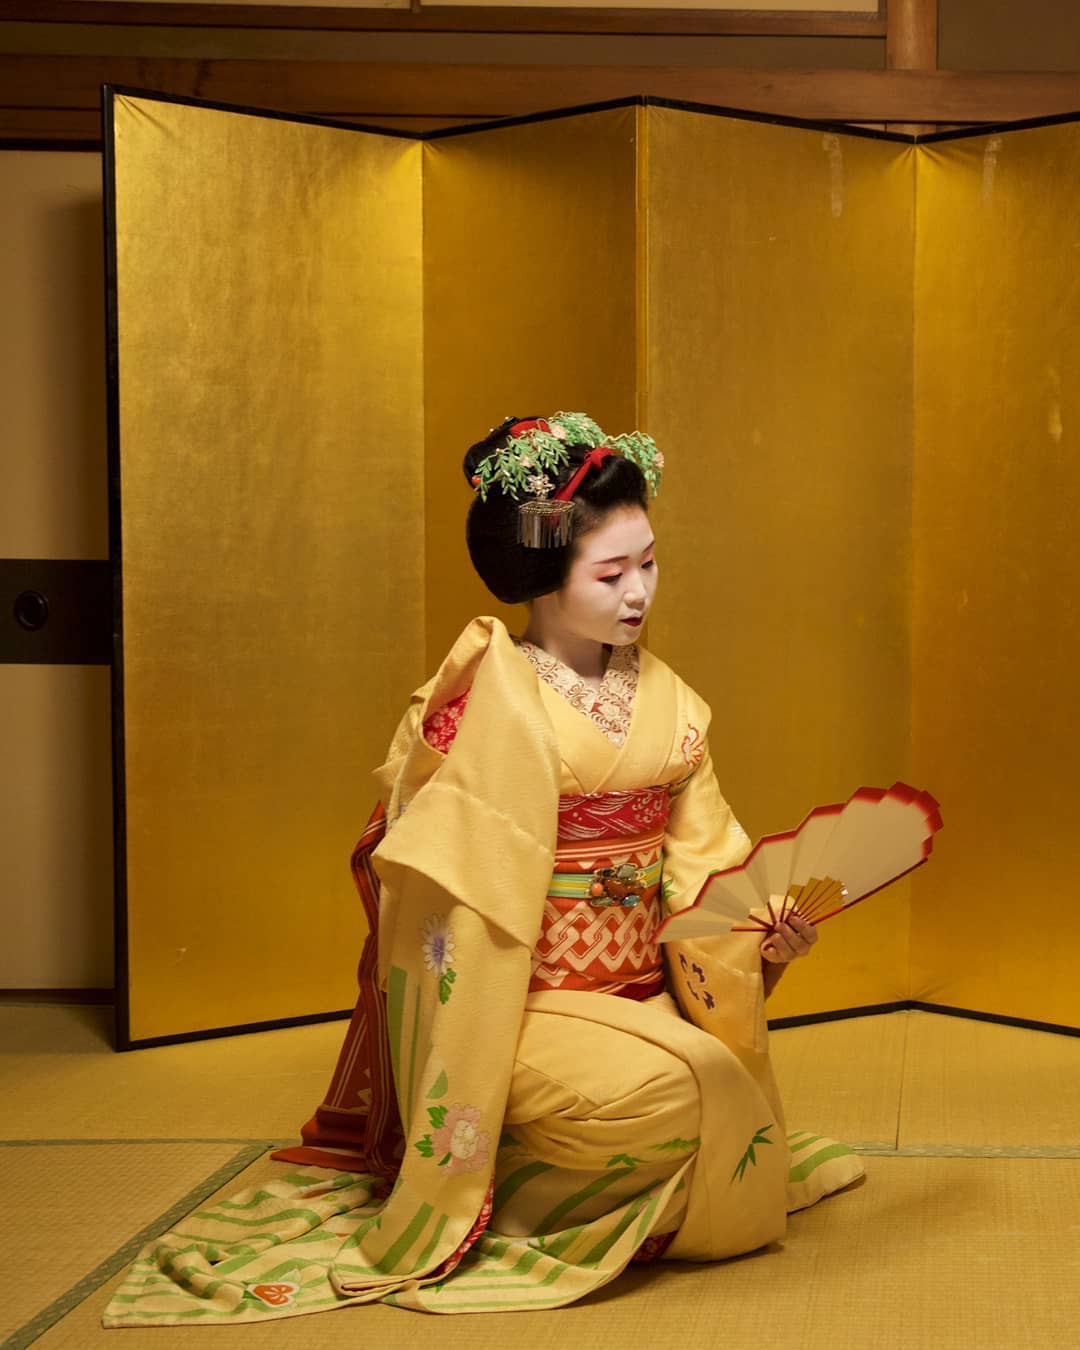 Visit Japan: Kyoto is home to one of Japan’s most famous geisha ...